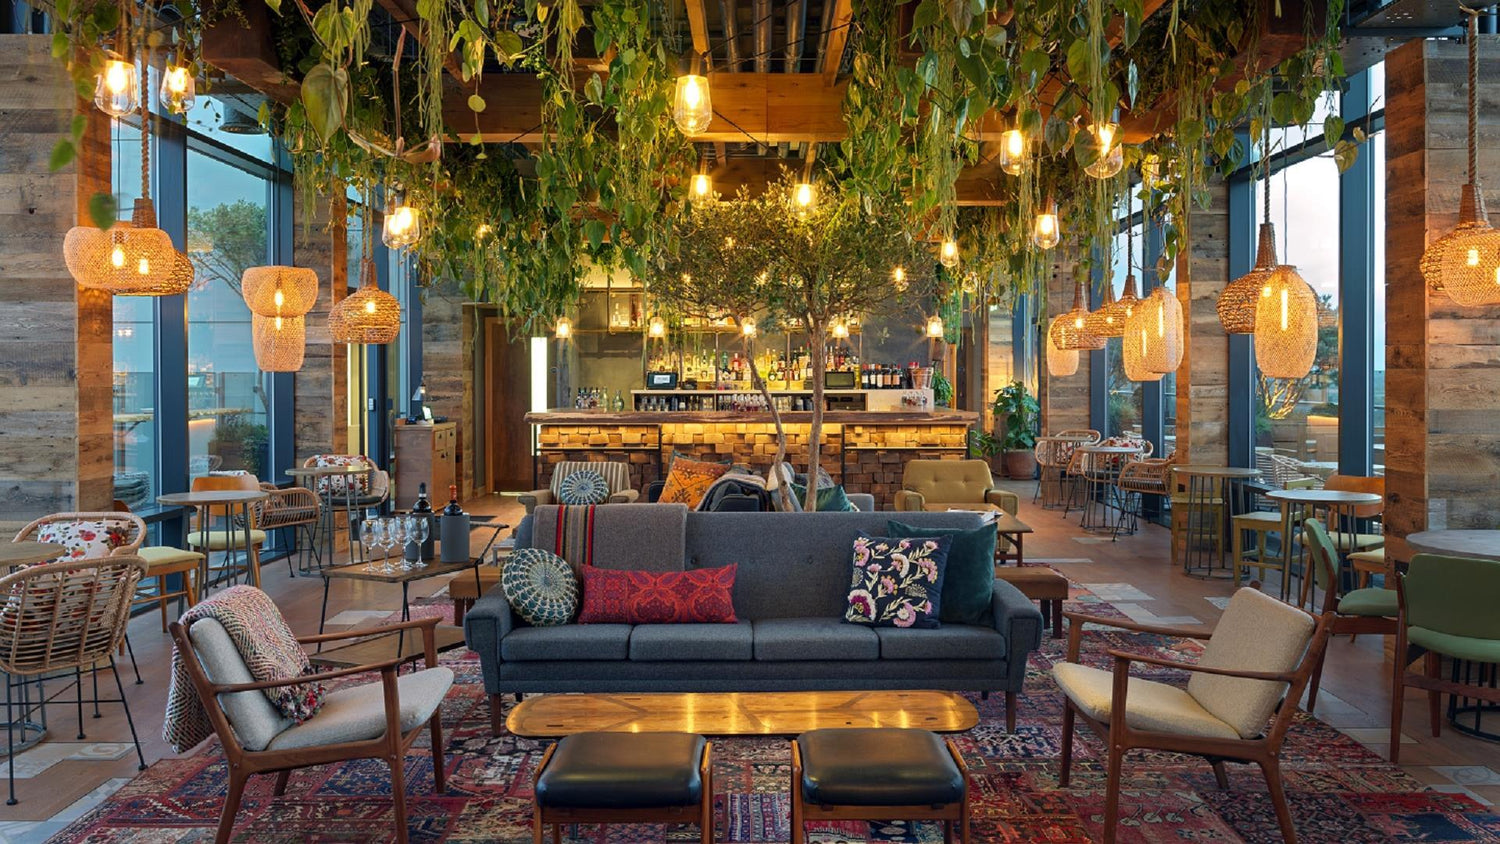 The Treehouse Hotel in London scented ambience collab by Scent Marketing Inc